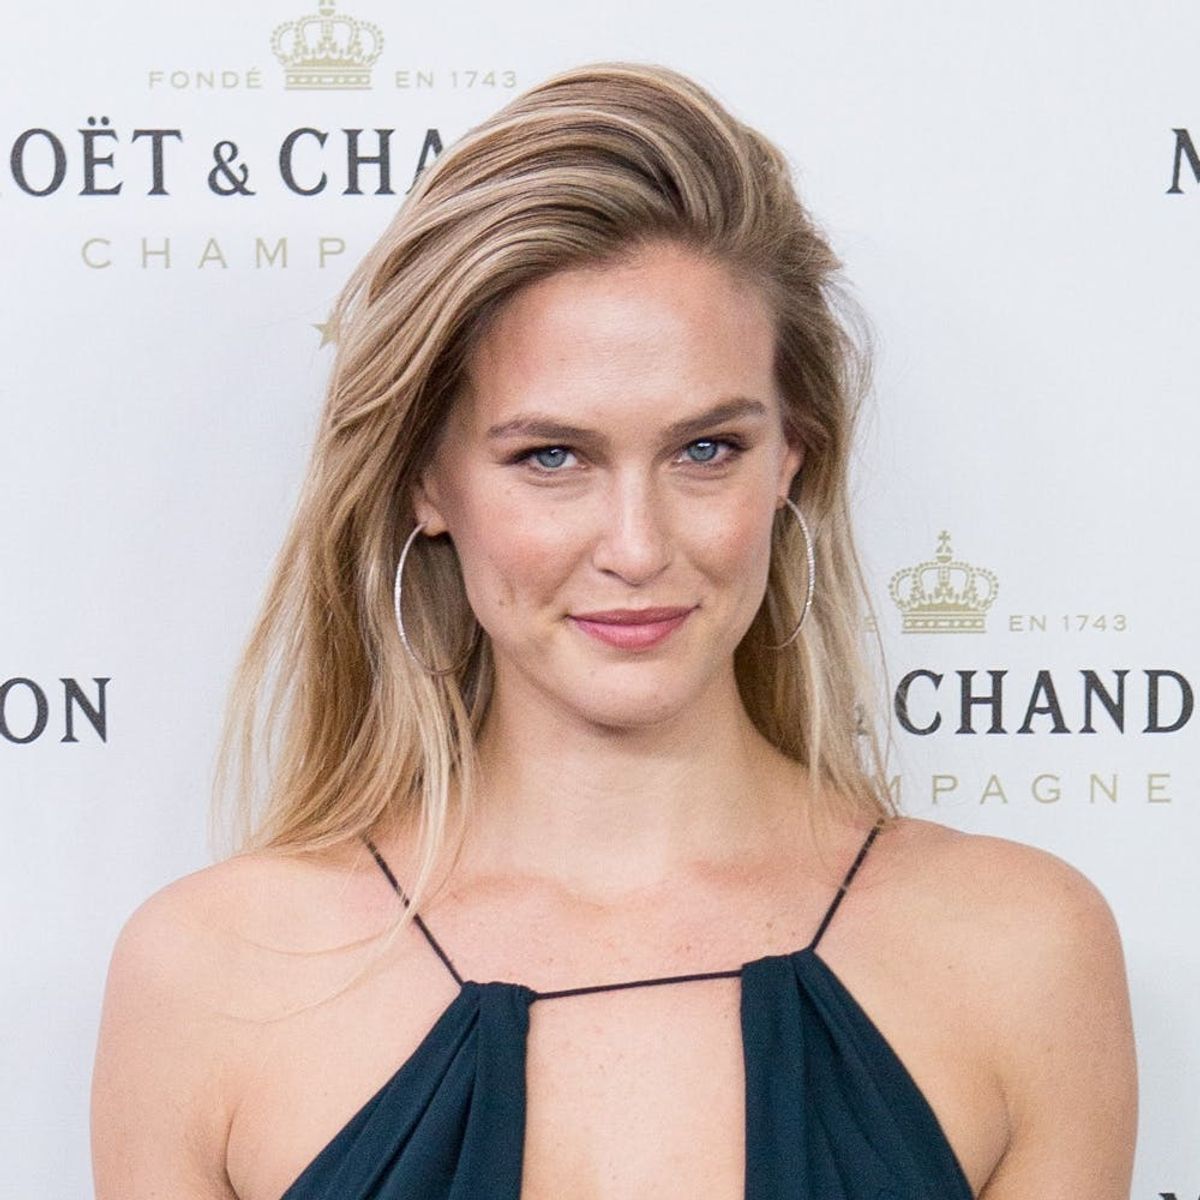 Bar Refaeli Is Expecting Her Second Child Less Than a Year After Having Her First